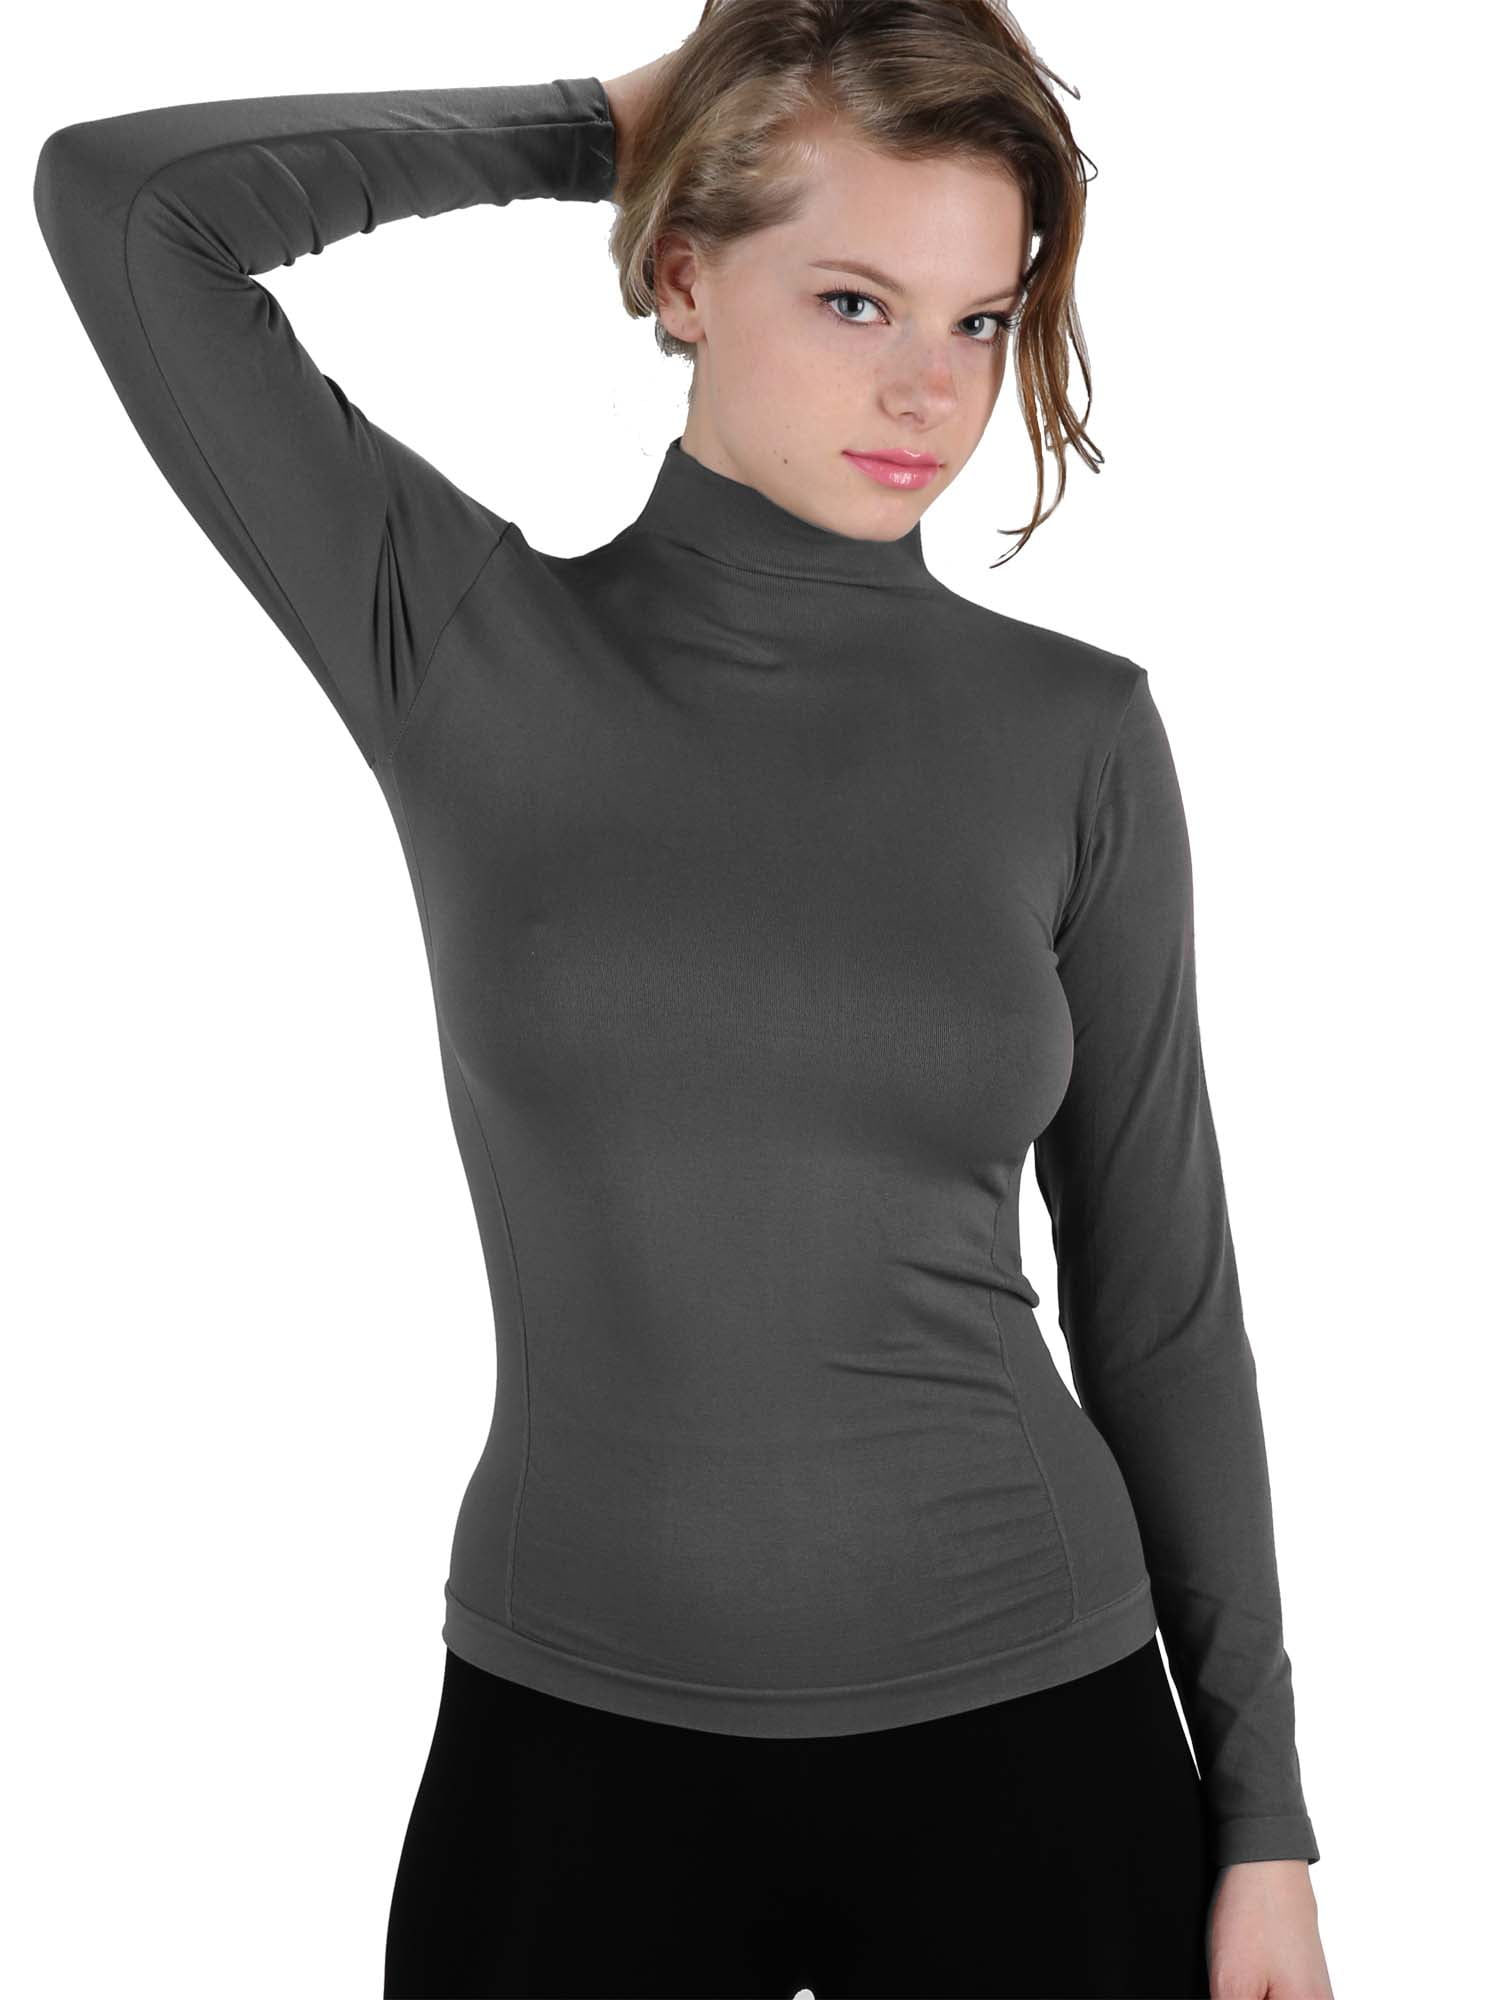 Merhy Sleeveless Mock Turtleneck Tops for Womens Casual Slim Fit Stretchy Lightweight Pullover Shirts Blouse 